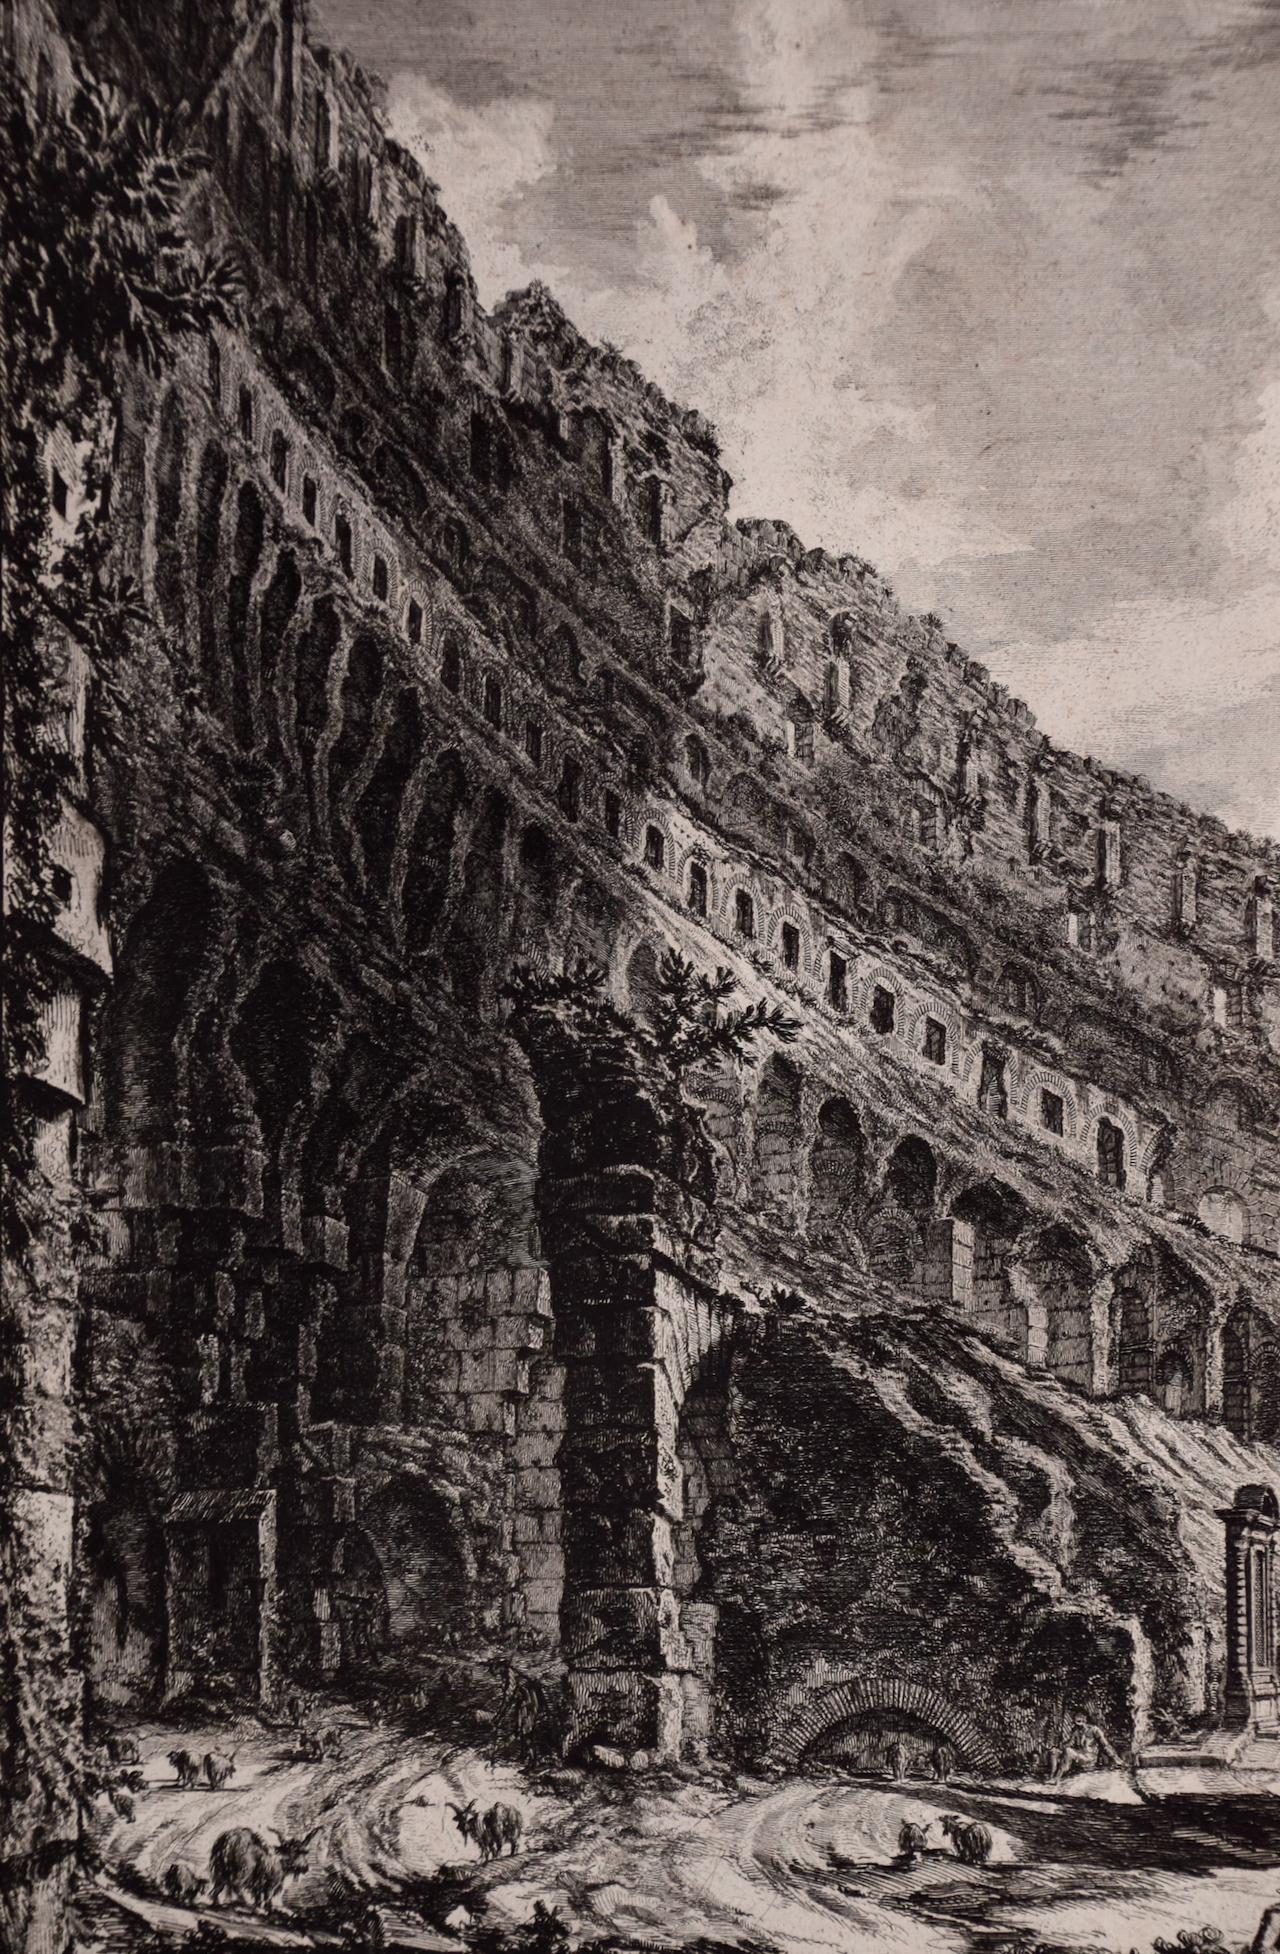 The Roman Colosseum: A Framed 18th Century Etching of the Interior by Piranesi - Old Masters Print by Giovanni Battista Piranesi